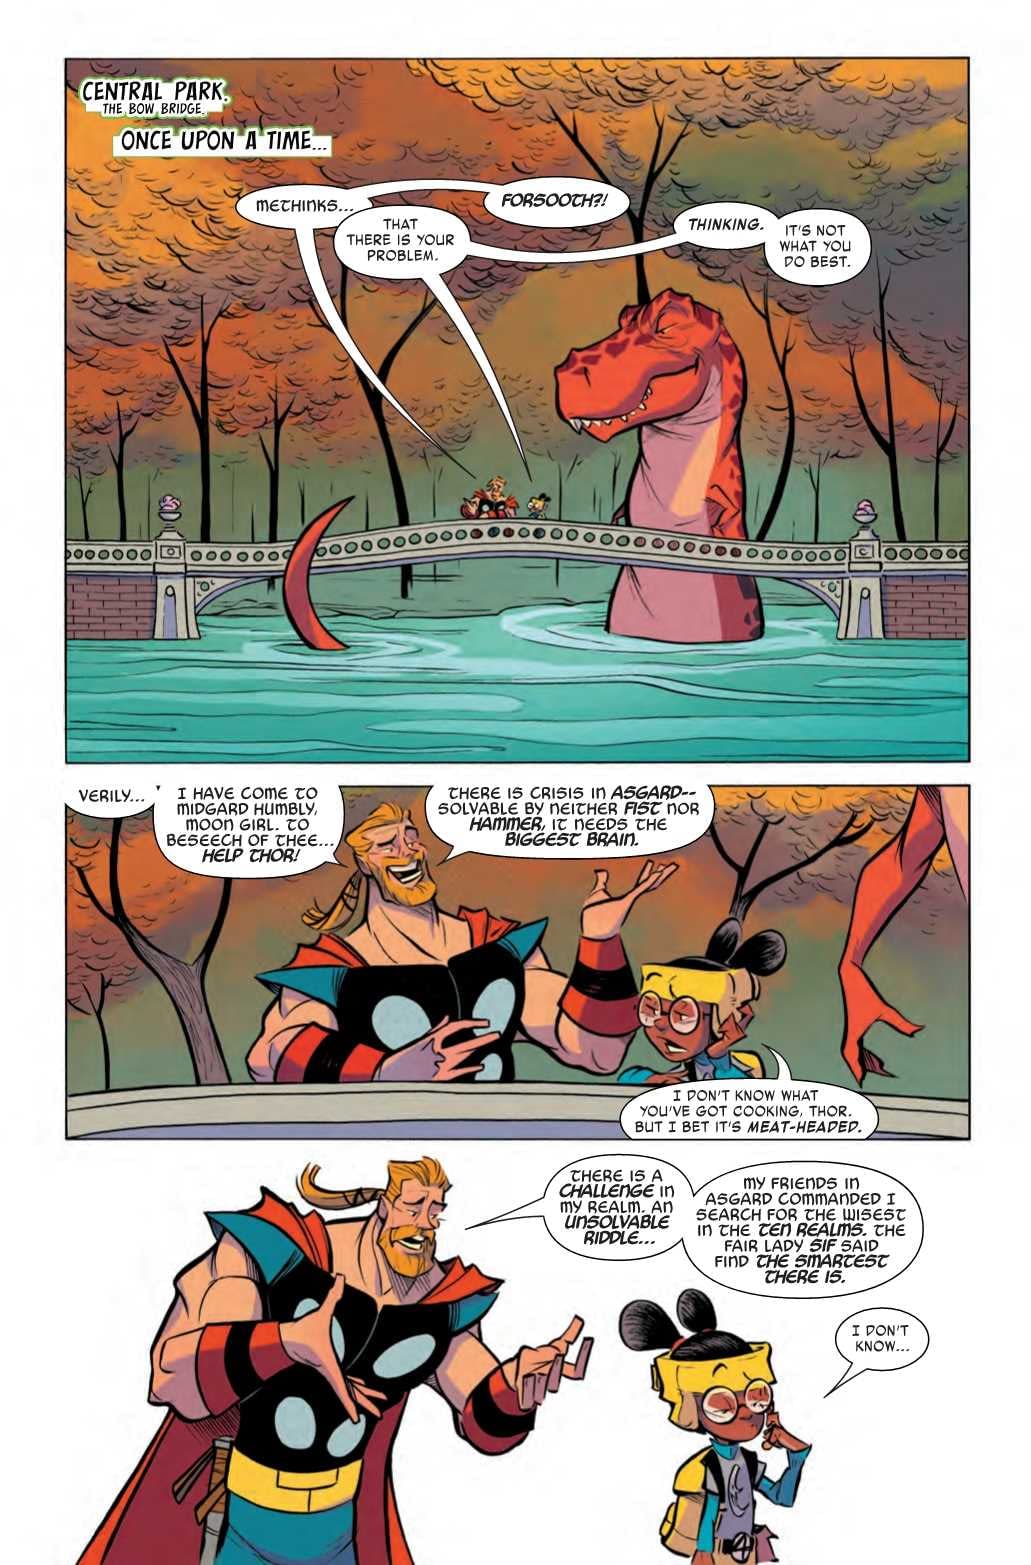 Moon Girl Puts Thor in His Place - Moon Girl and Devil Dinosaur #43 Preview